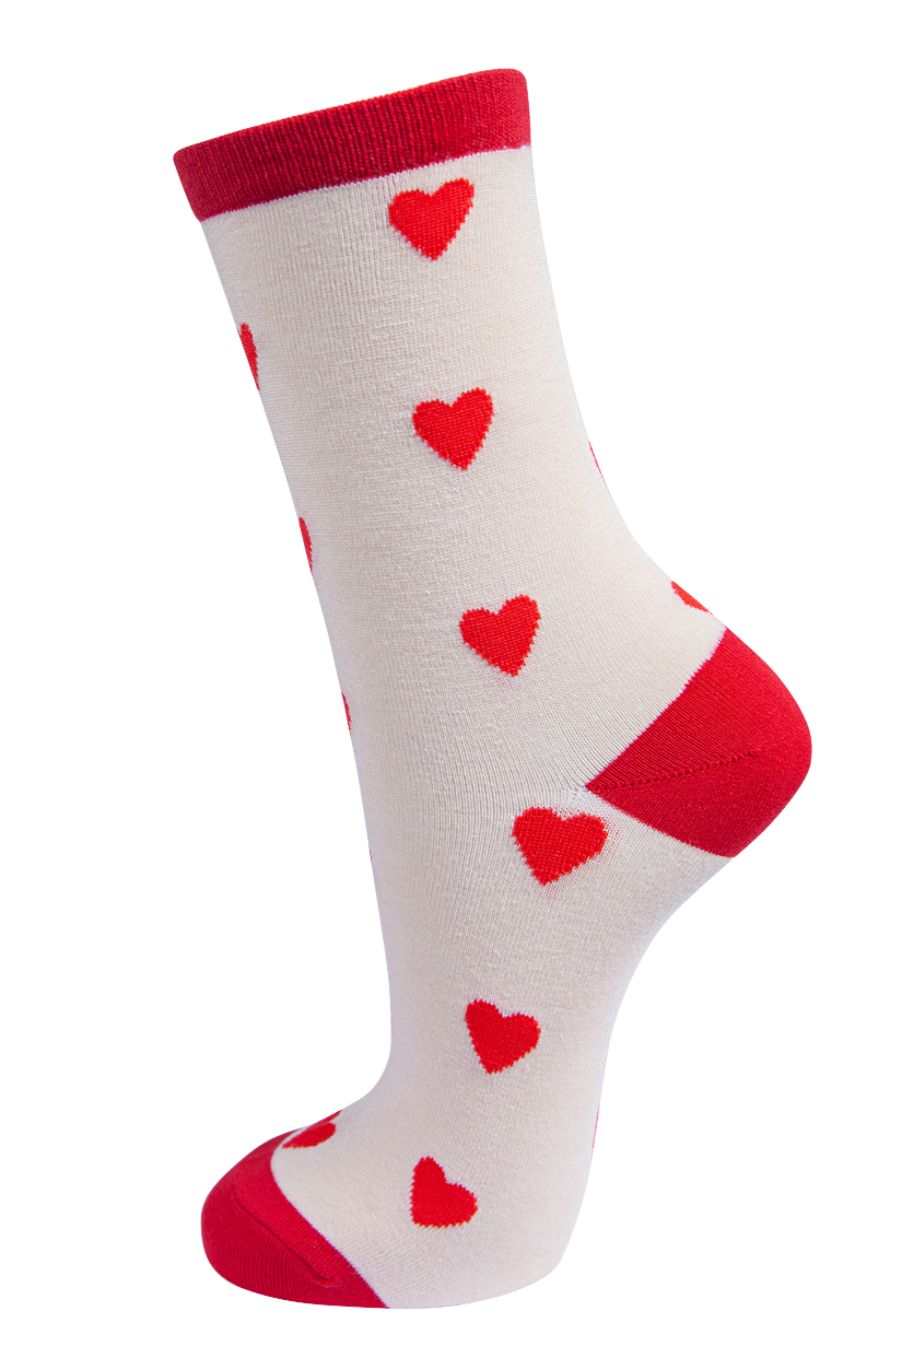 cream, red bamboo socks with an all over red love heart pattern